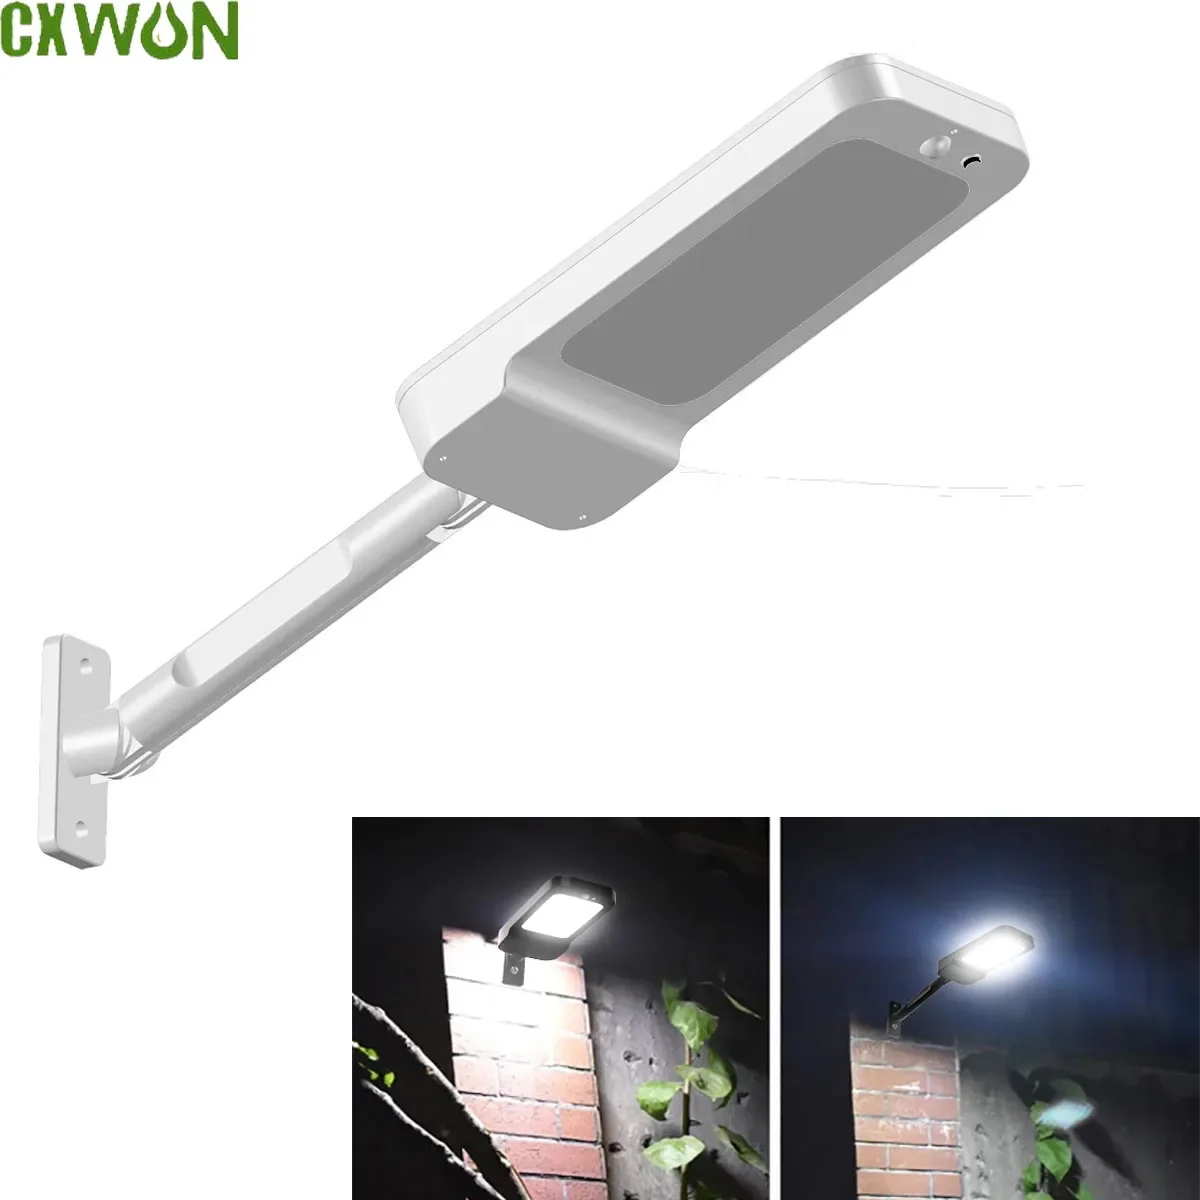 Outdoor Solar Lamp with Motion Detector LED Solar Powered Wall Lights 4 Modes Lighting Security Flood Light for Garden Fence 5 modes wall scanner stud finder depth sensor metal detector wood stud ac live cable wires scanner center and positioning tool